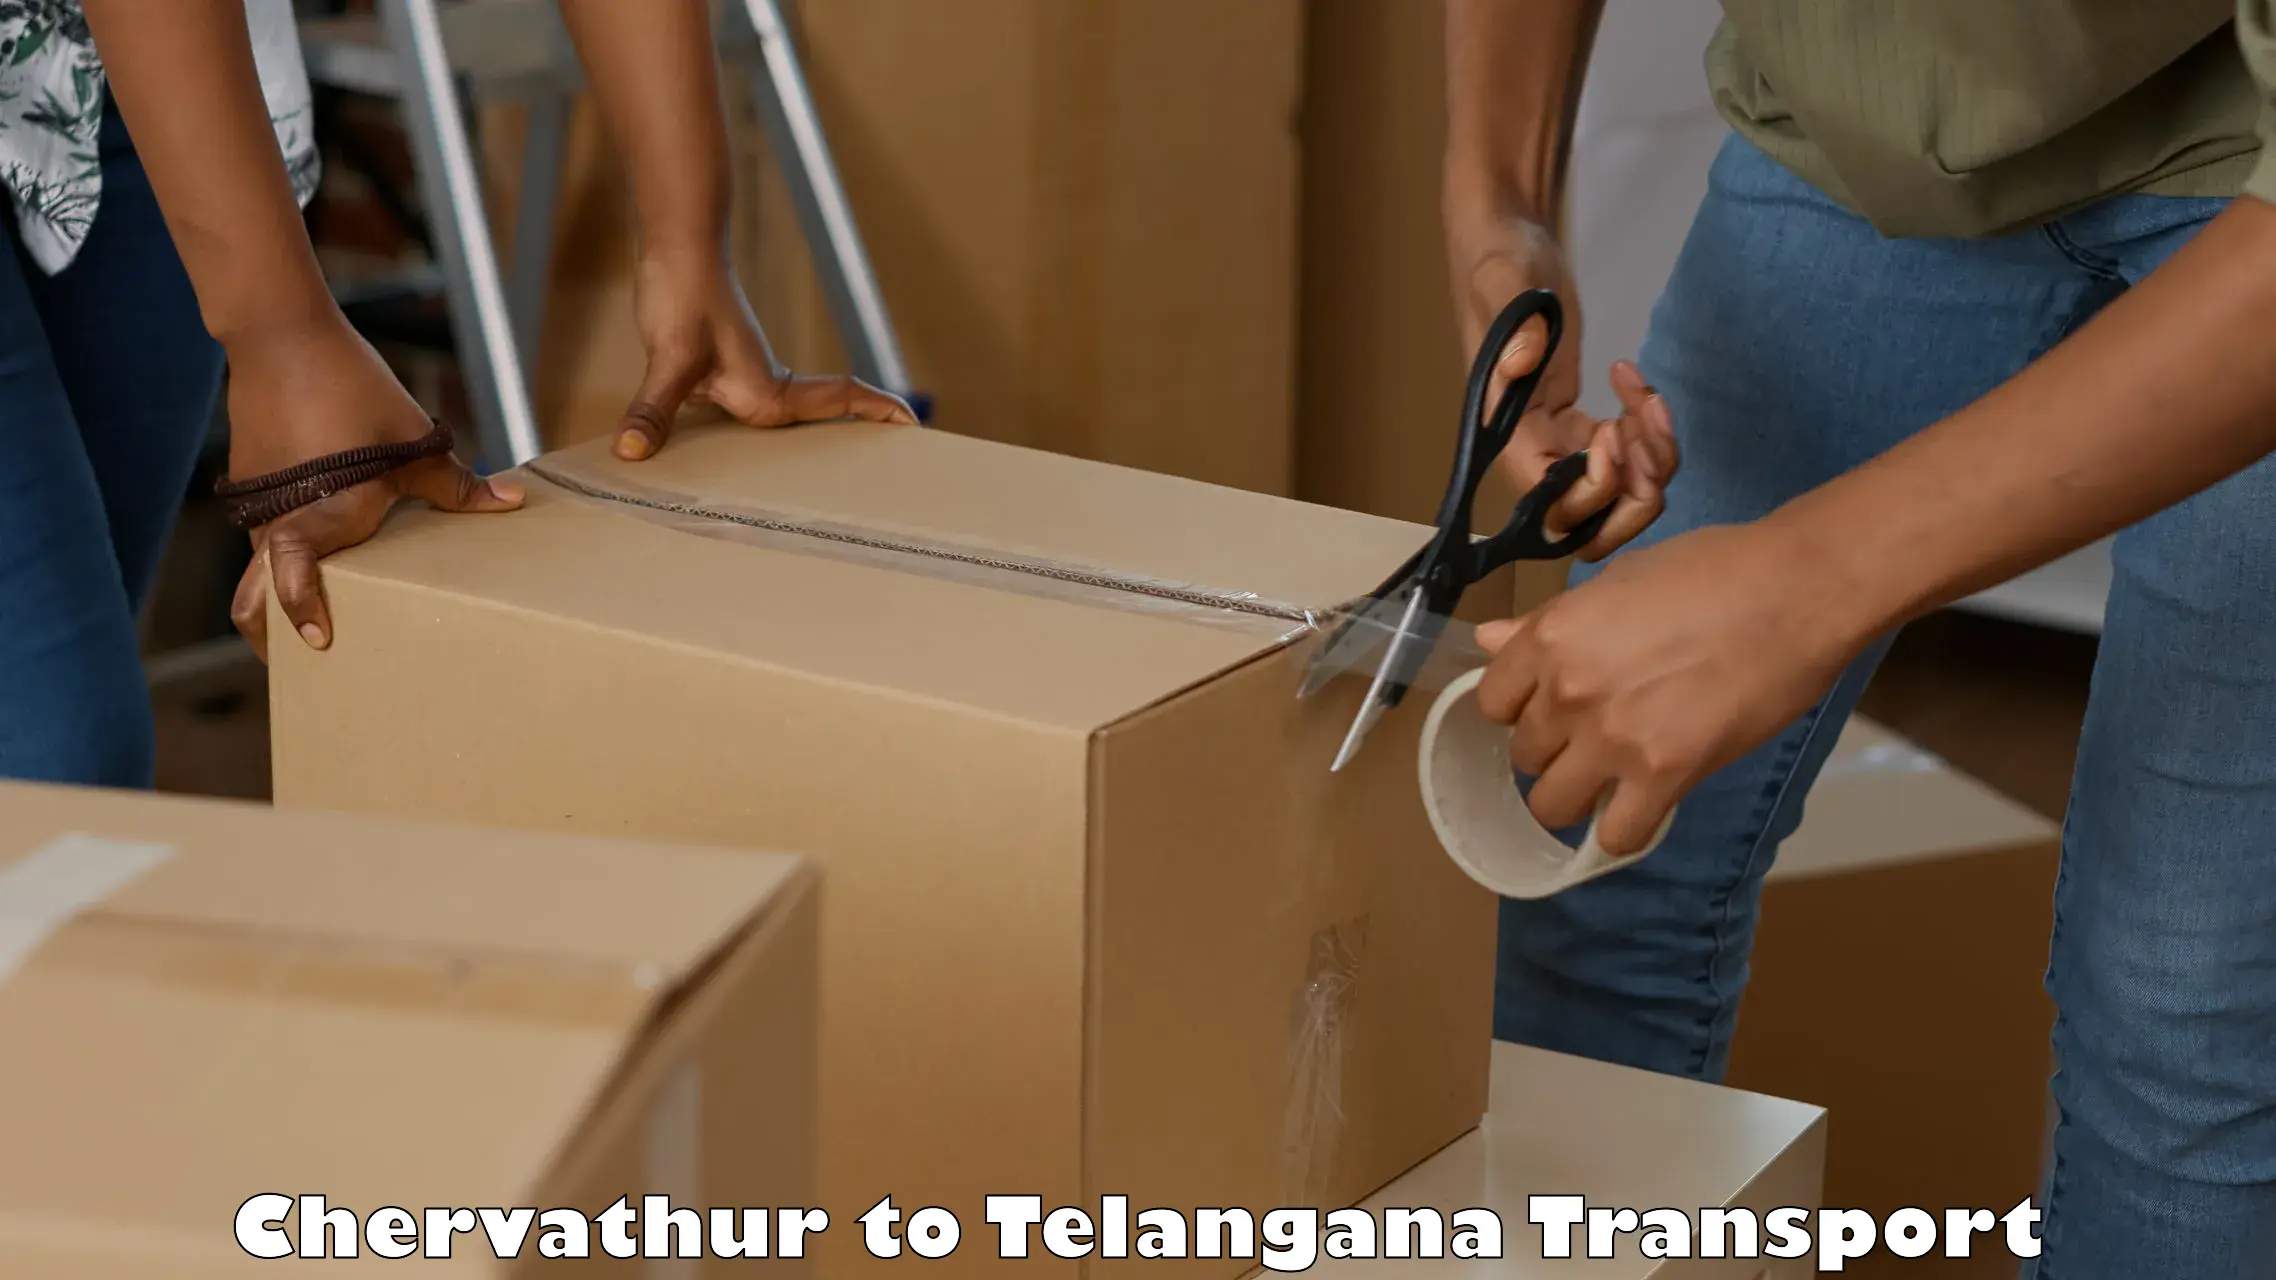 Two wheeler transport services Chervathur to Hyderabad